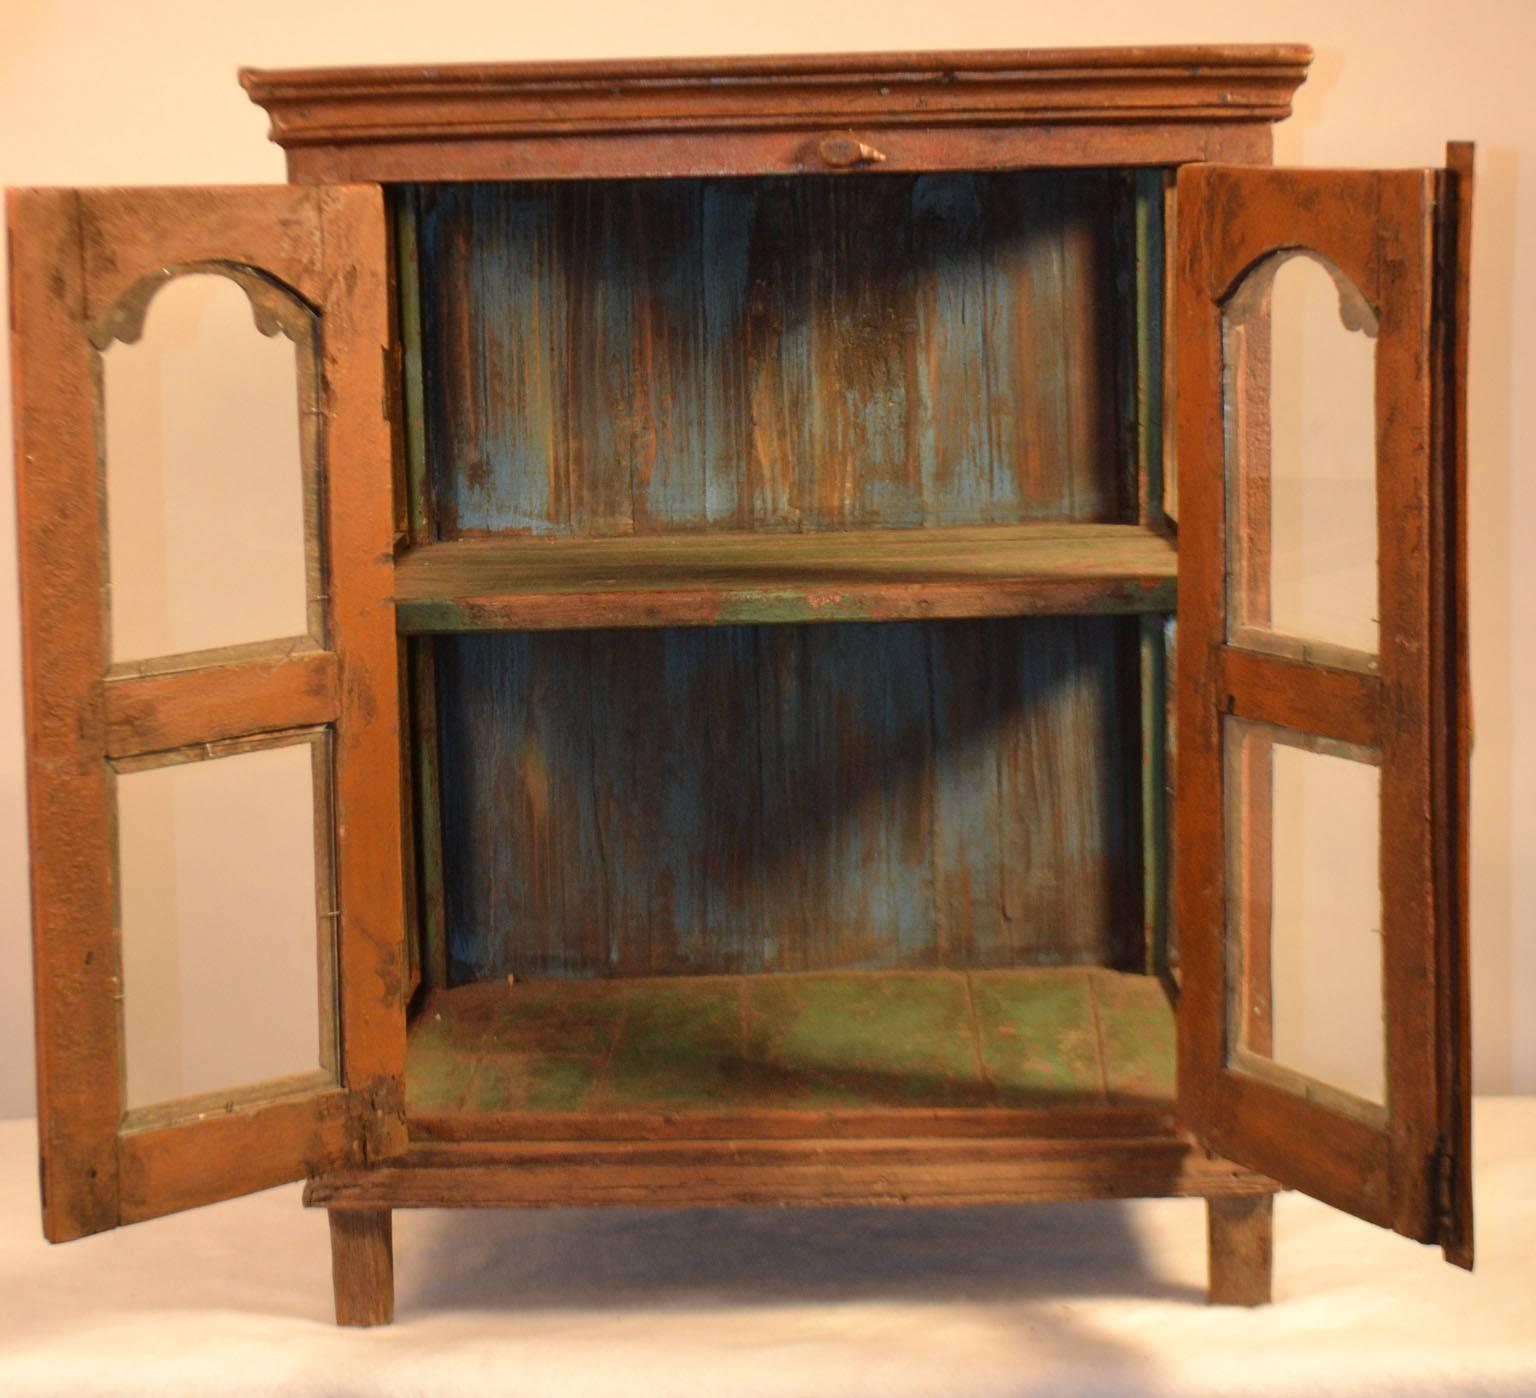 French Late 18th Century Painted Wood Hanging Shelf with Glass Doors For Sale